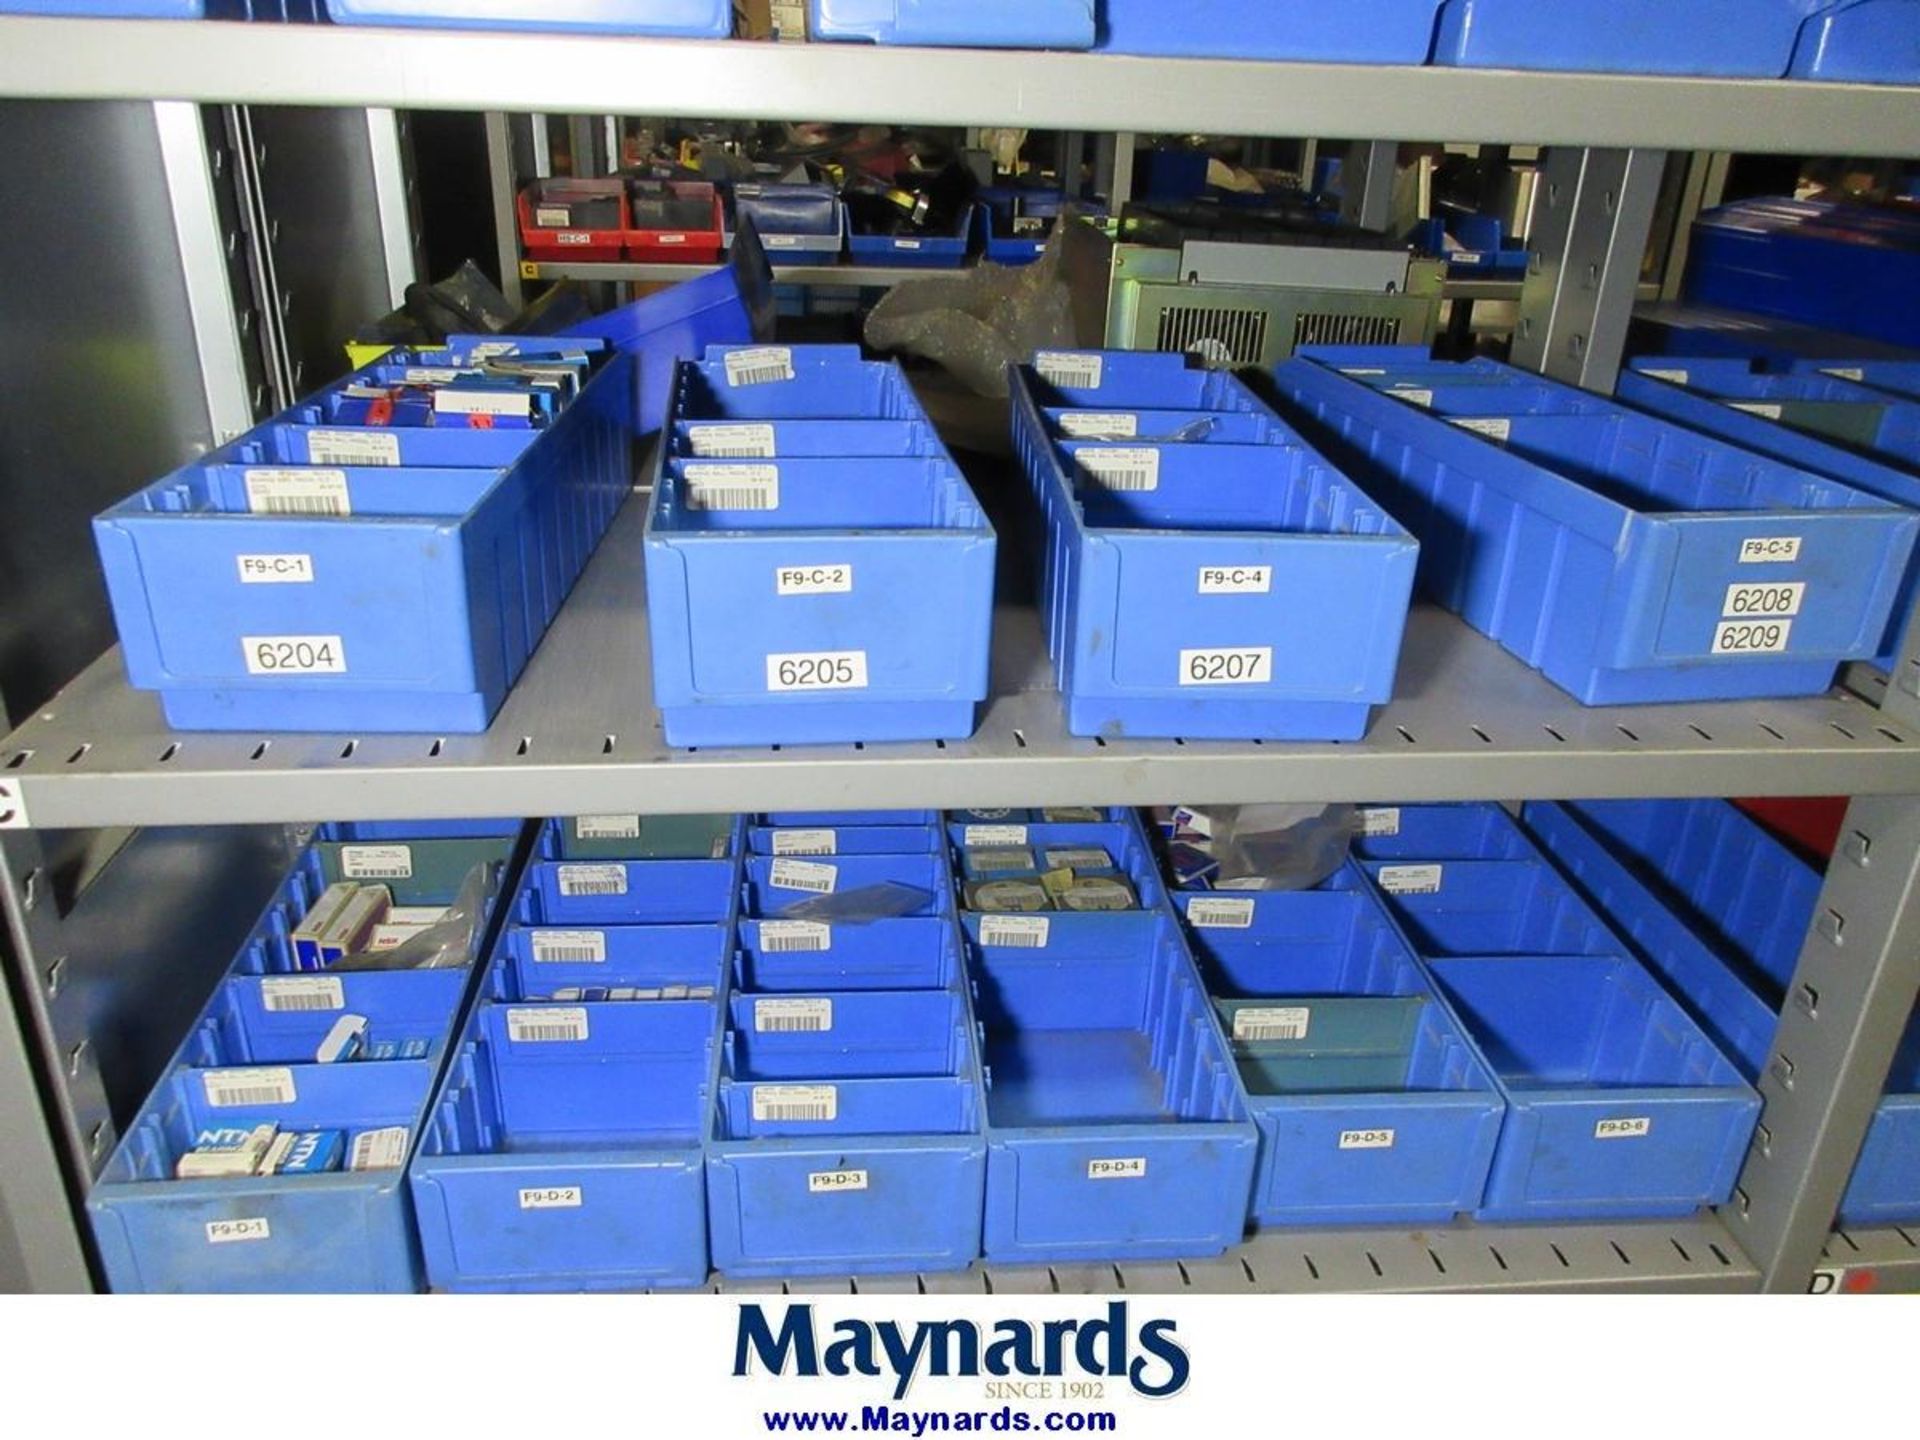 Large Lot of Electrical Controls, PLC's, Drives & Remaining Contents of Maint. Parts Crib - Image 72 of 107